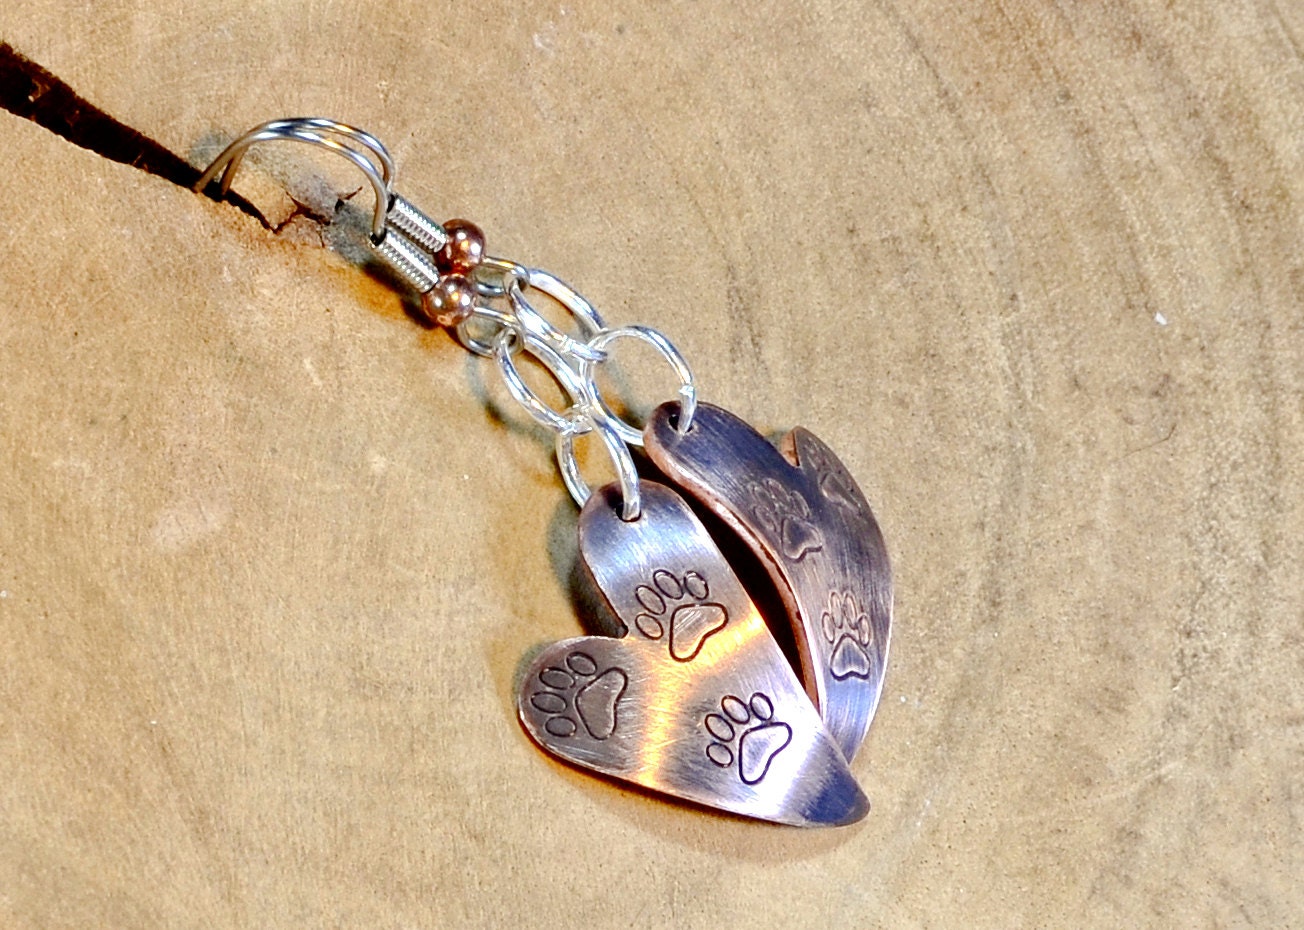 Heart Shaped Copper Dangle Earrings with Paw Design and Patina on Copper